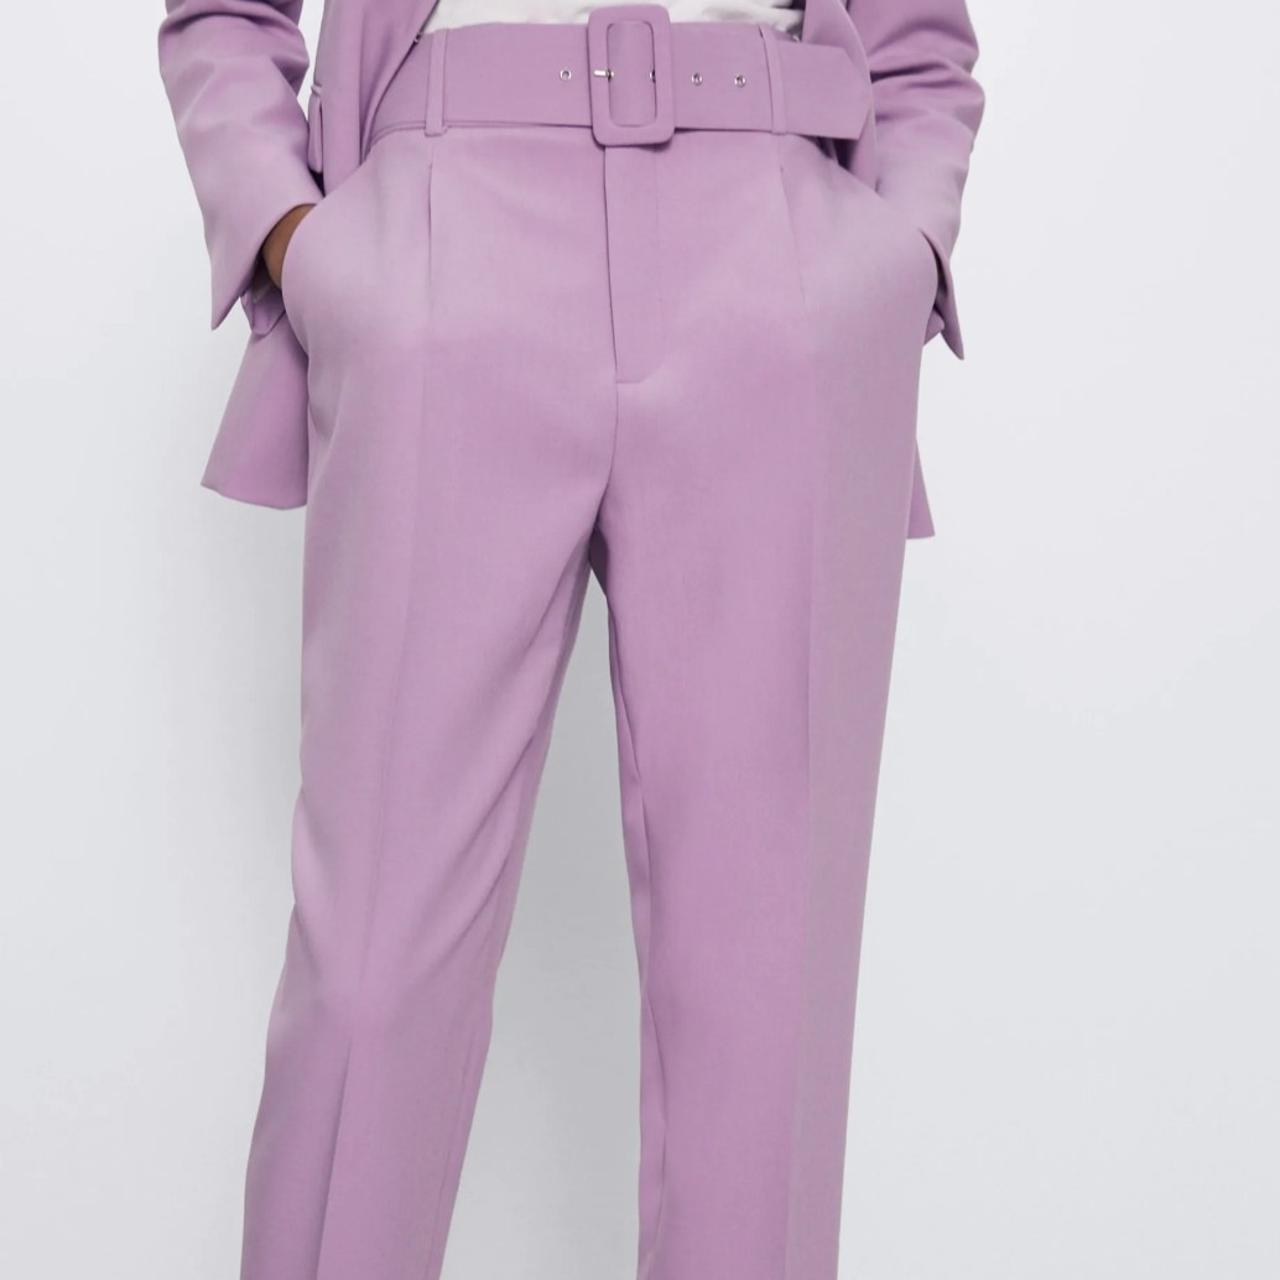 Zara Lilac Trousers Womens Fashion Bottoms Other Bottoms on Carousell